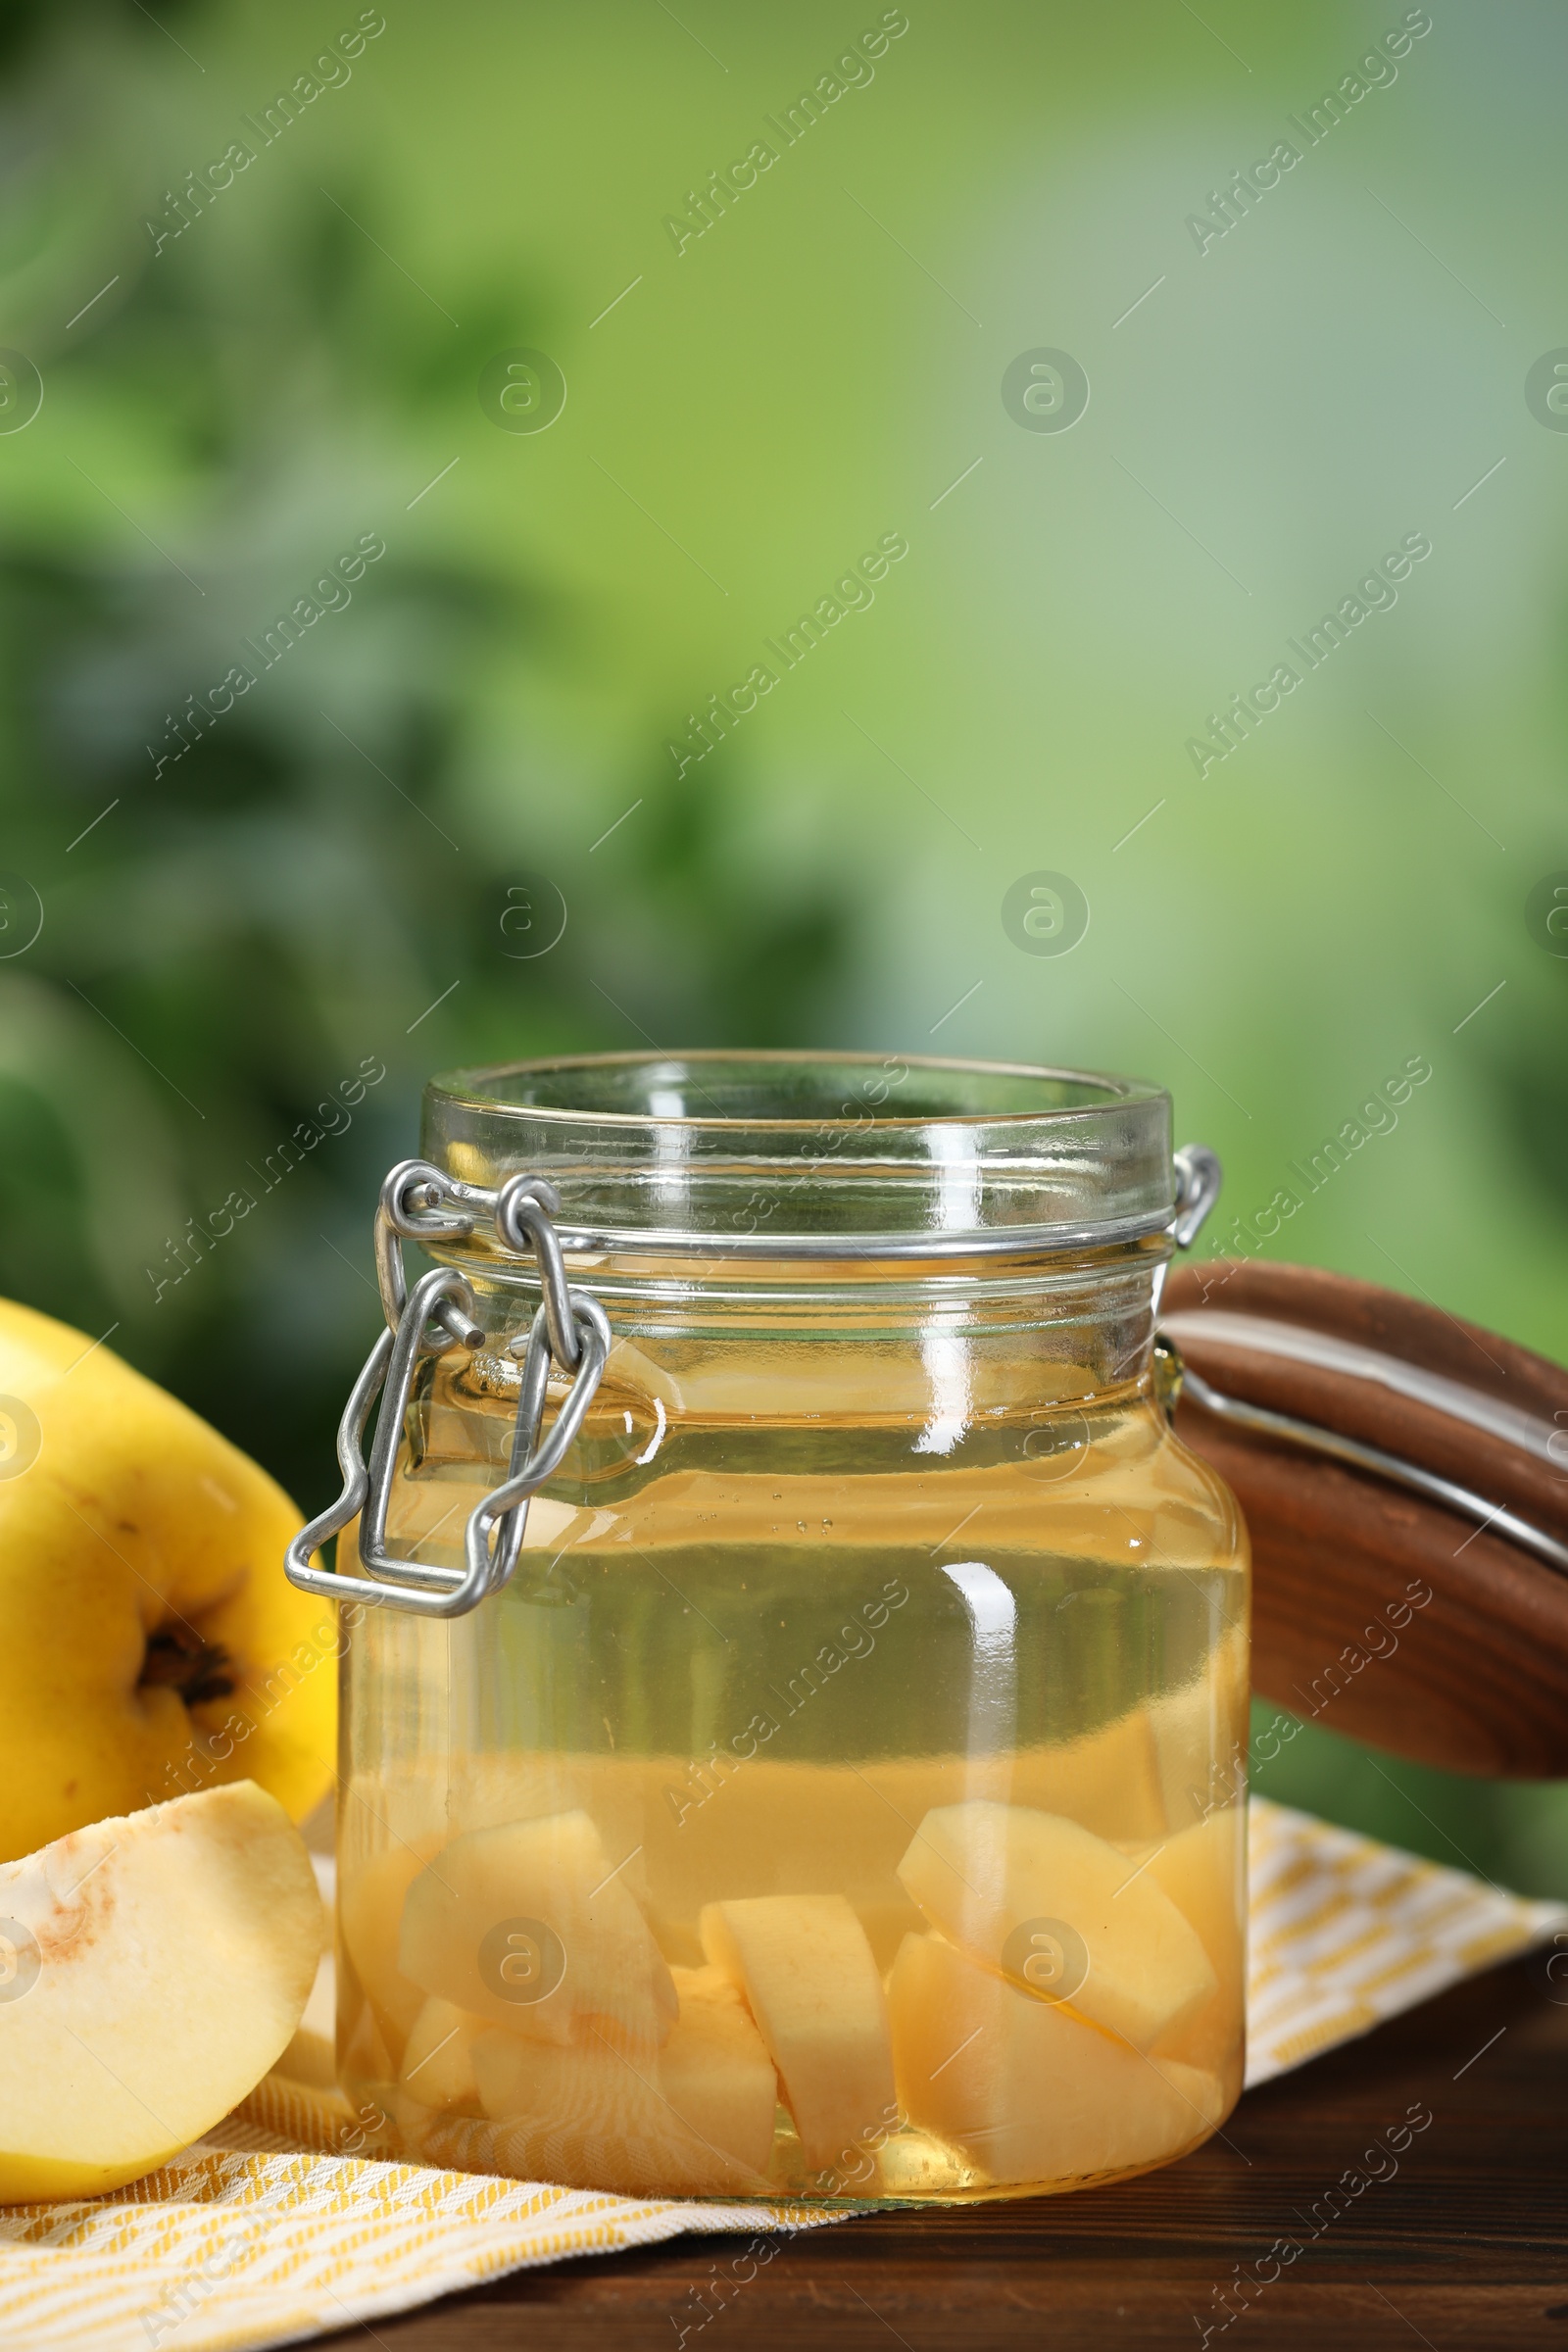 Photo of Delicious quince drink and fresh fruits on wooden table against blurred background, closeup